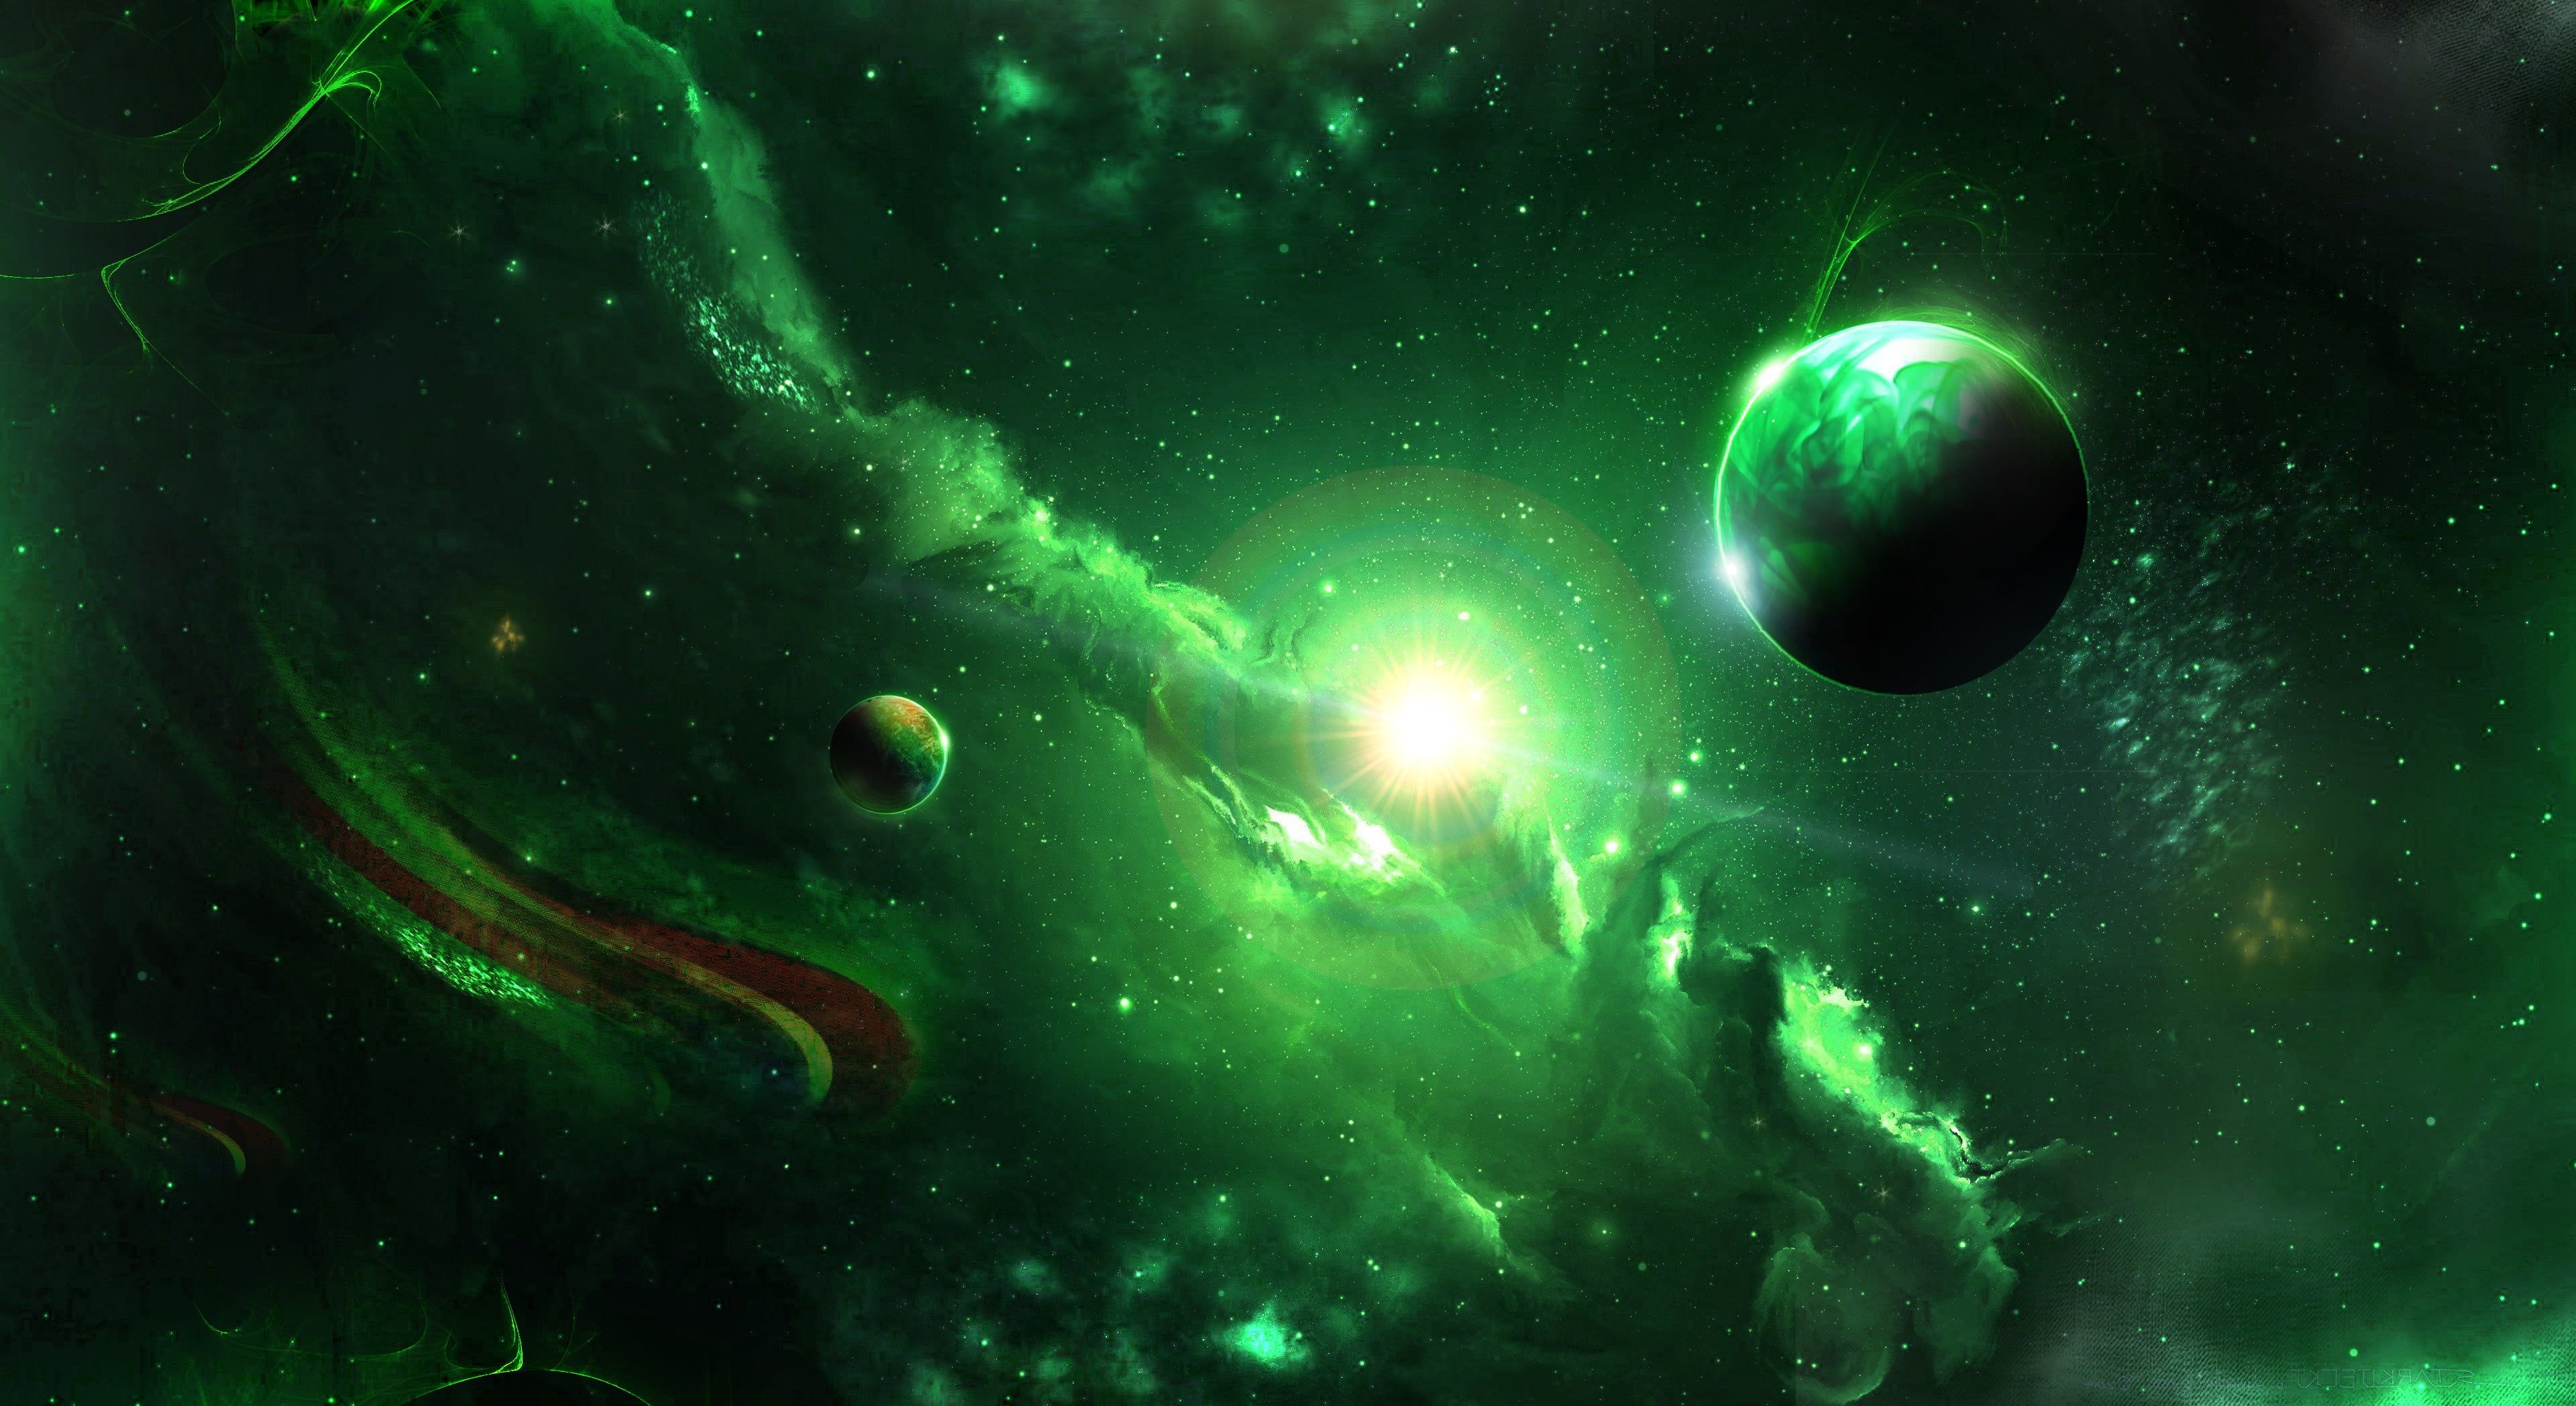 Green Nebula: Outer space monochrome green fan art, Planets and a star. 3840x2100 HD Wallpaper.